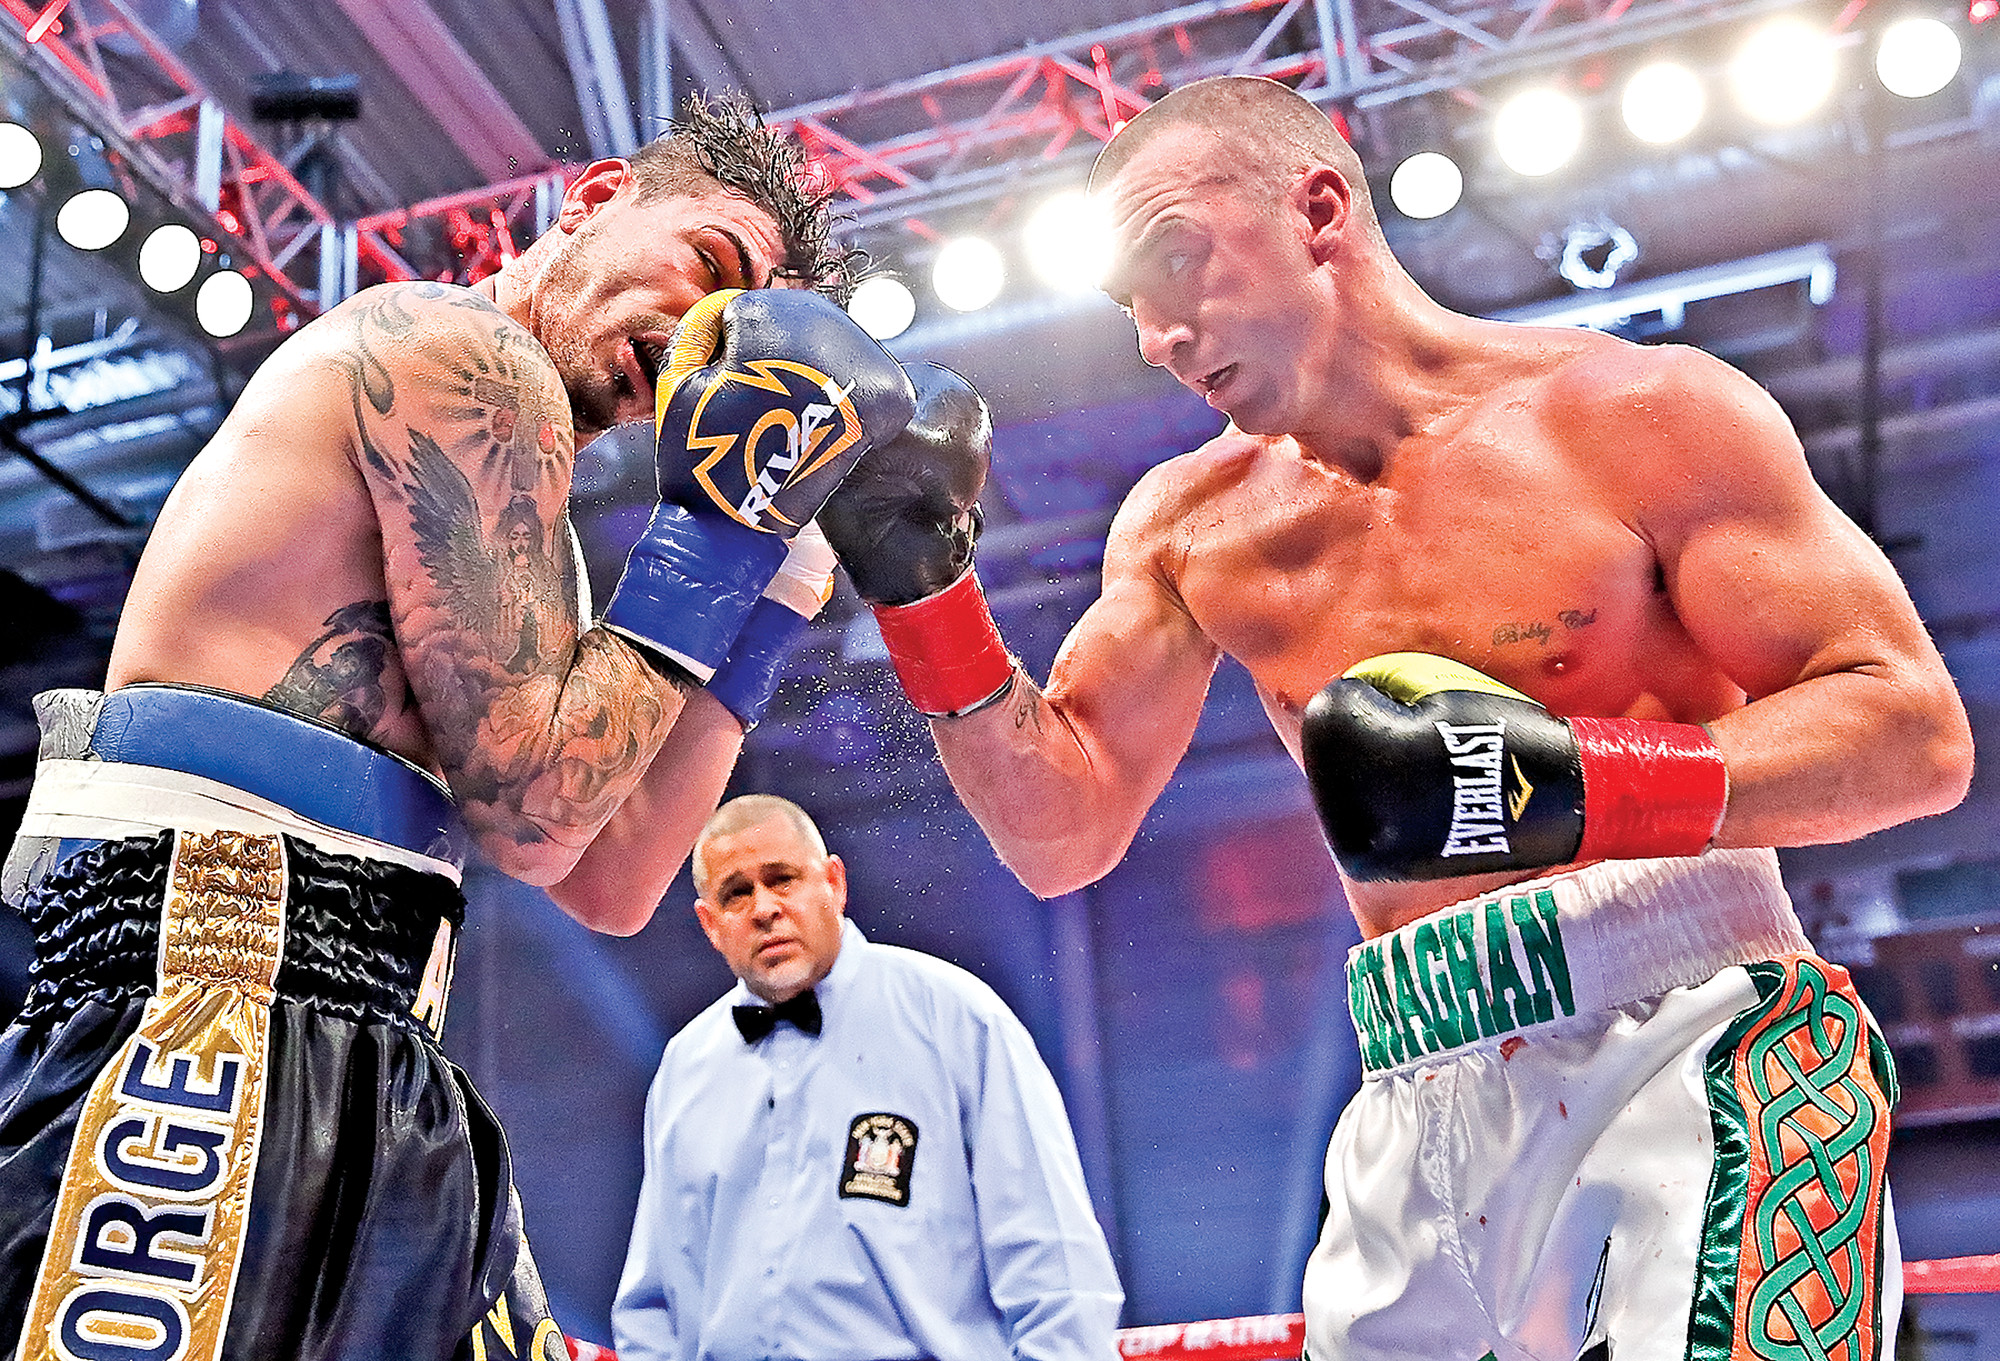 Courtesy Mikey WilliamsIn a thrilling 10-round bout, Long Beach’s own “Irish” Seanie Monaghan, right, defeated Chicago’s Donovan “Da Bomb” George last Friday and clinched the North American Boxing Organization light heavyweight title. Monaghan also ran his perfect record to 26-0, with 16 knockouts.